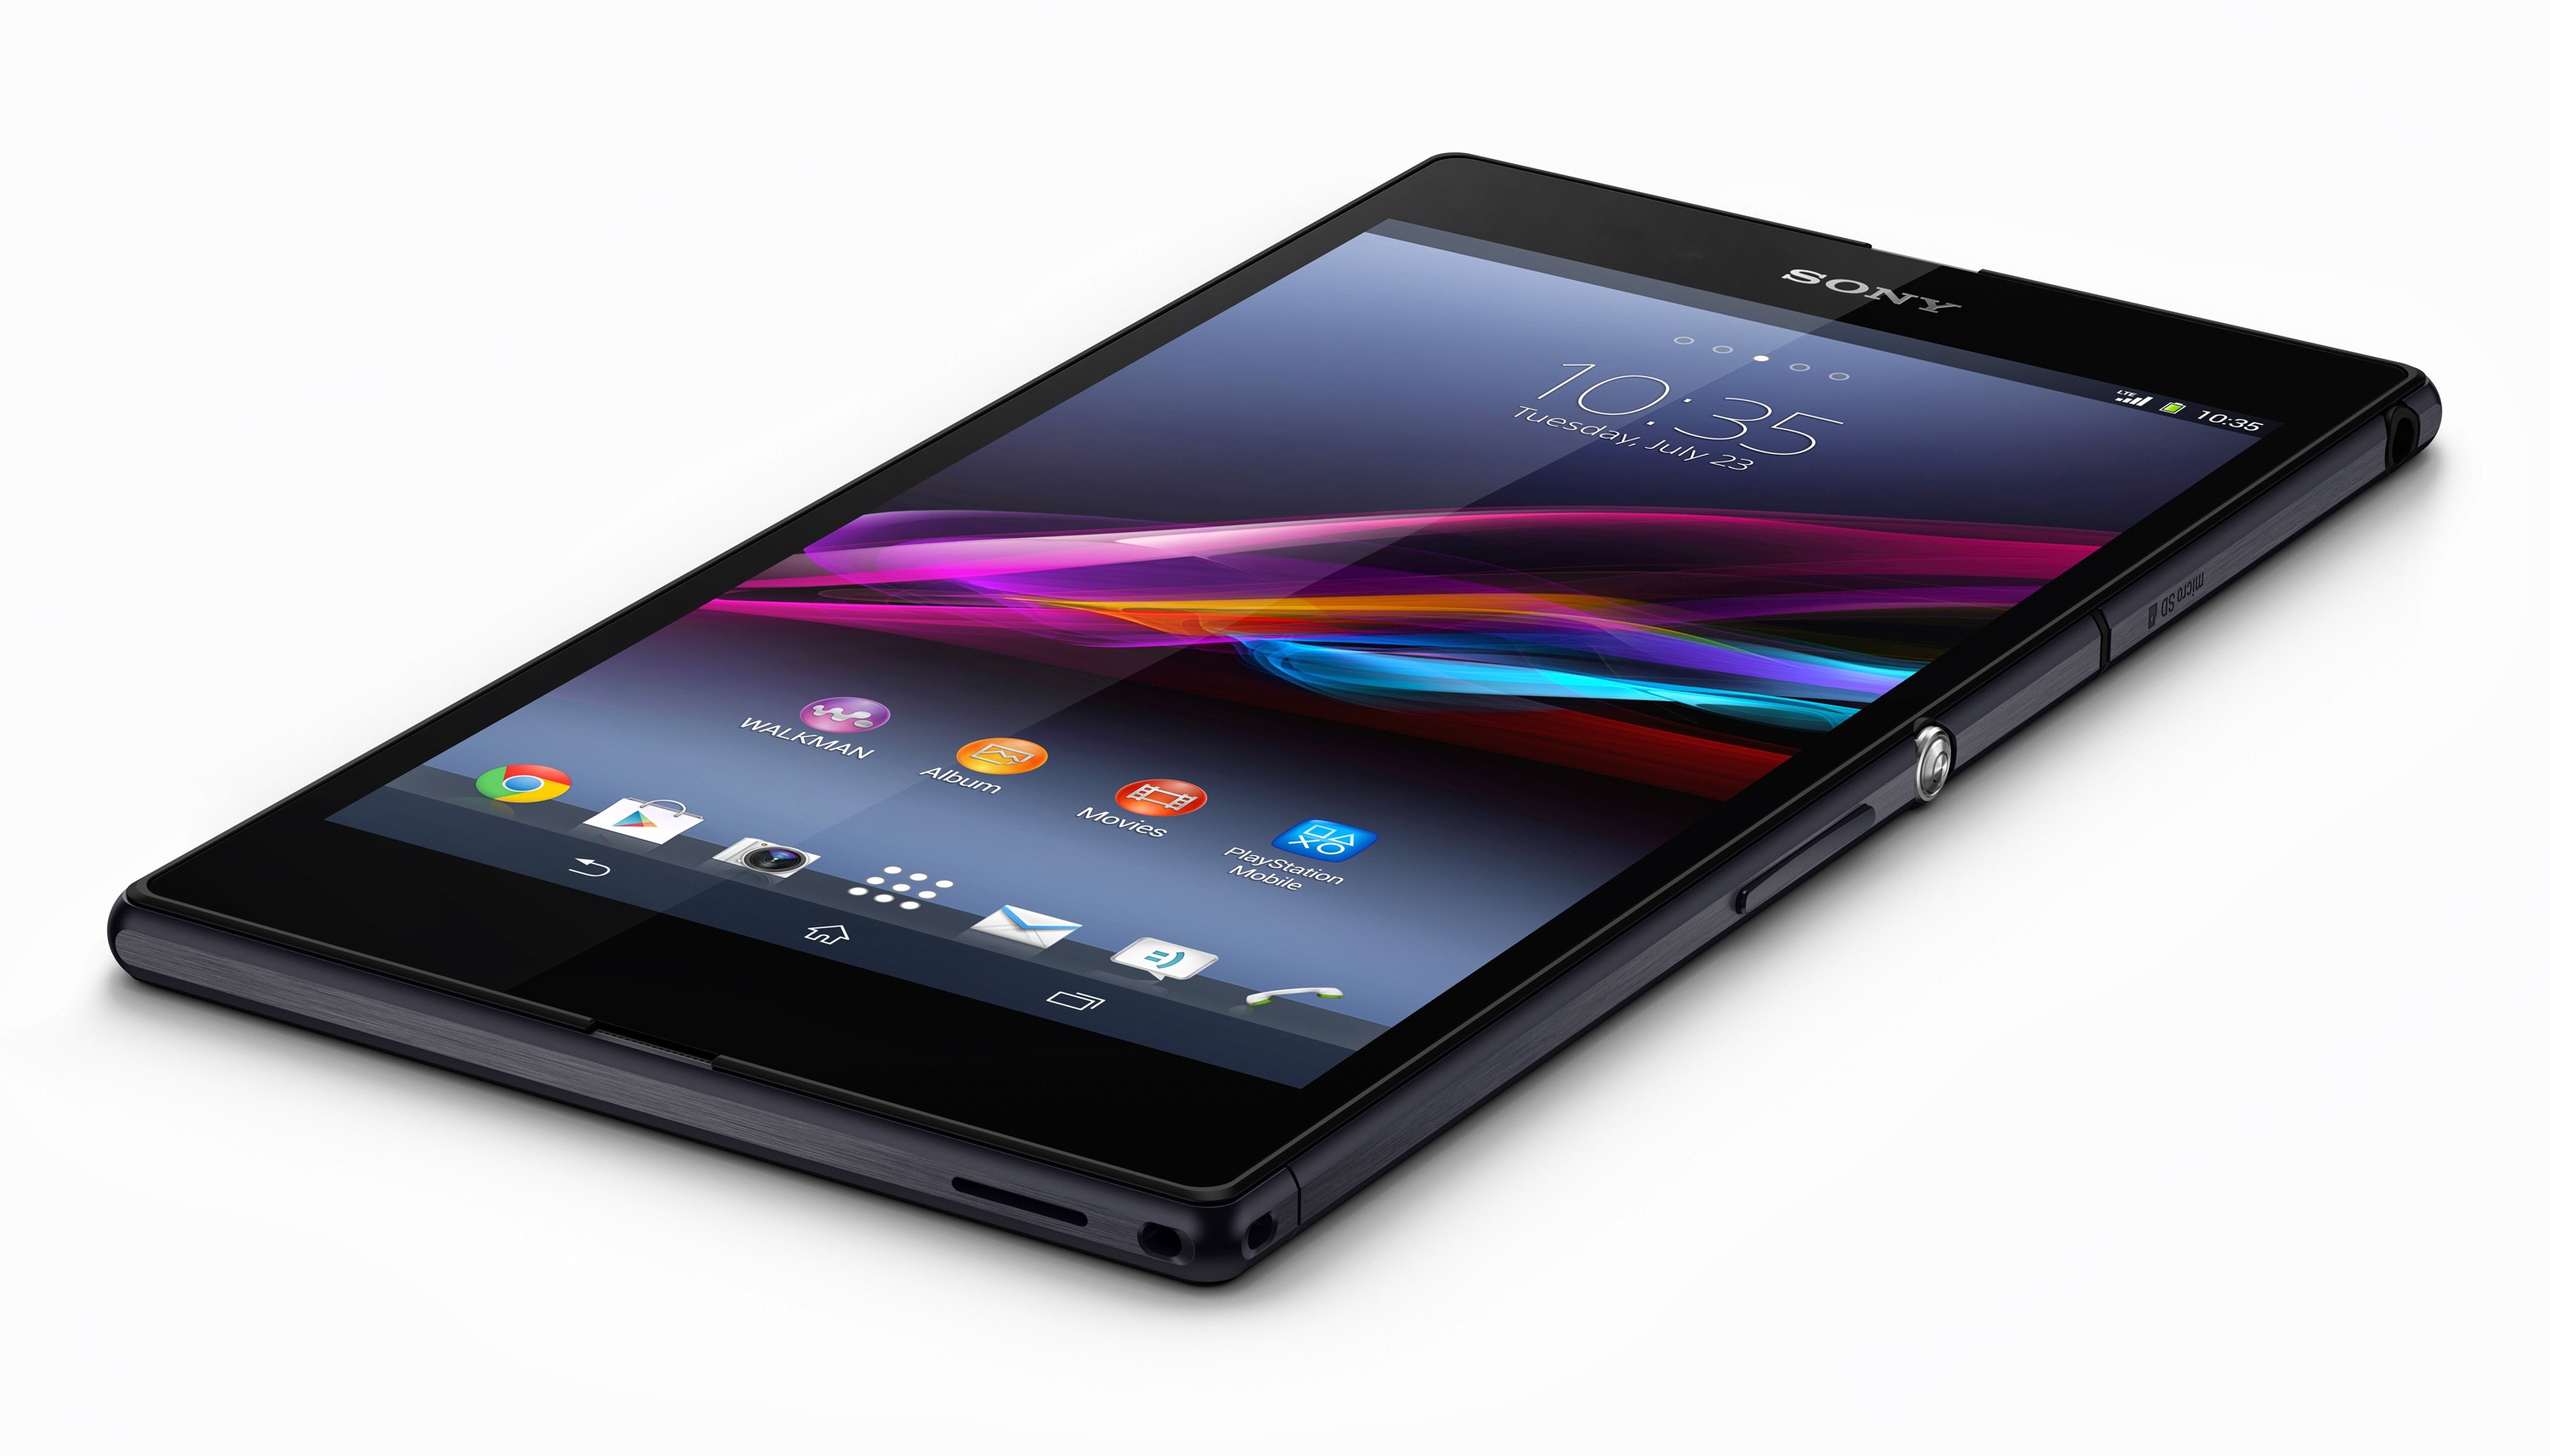 Preview Sony Xperia Z Ultra , HD Wallpaper & Backgrounds